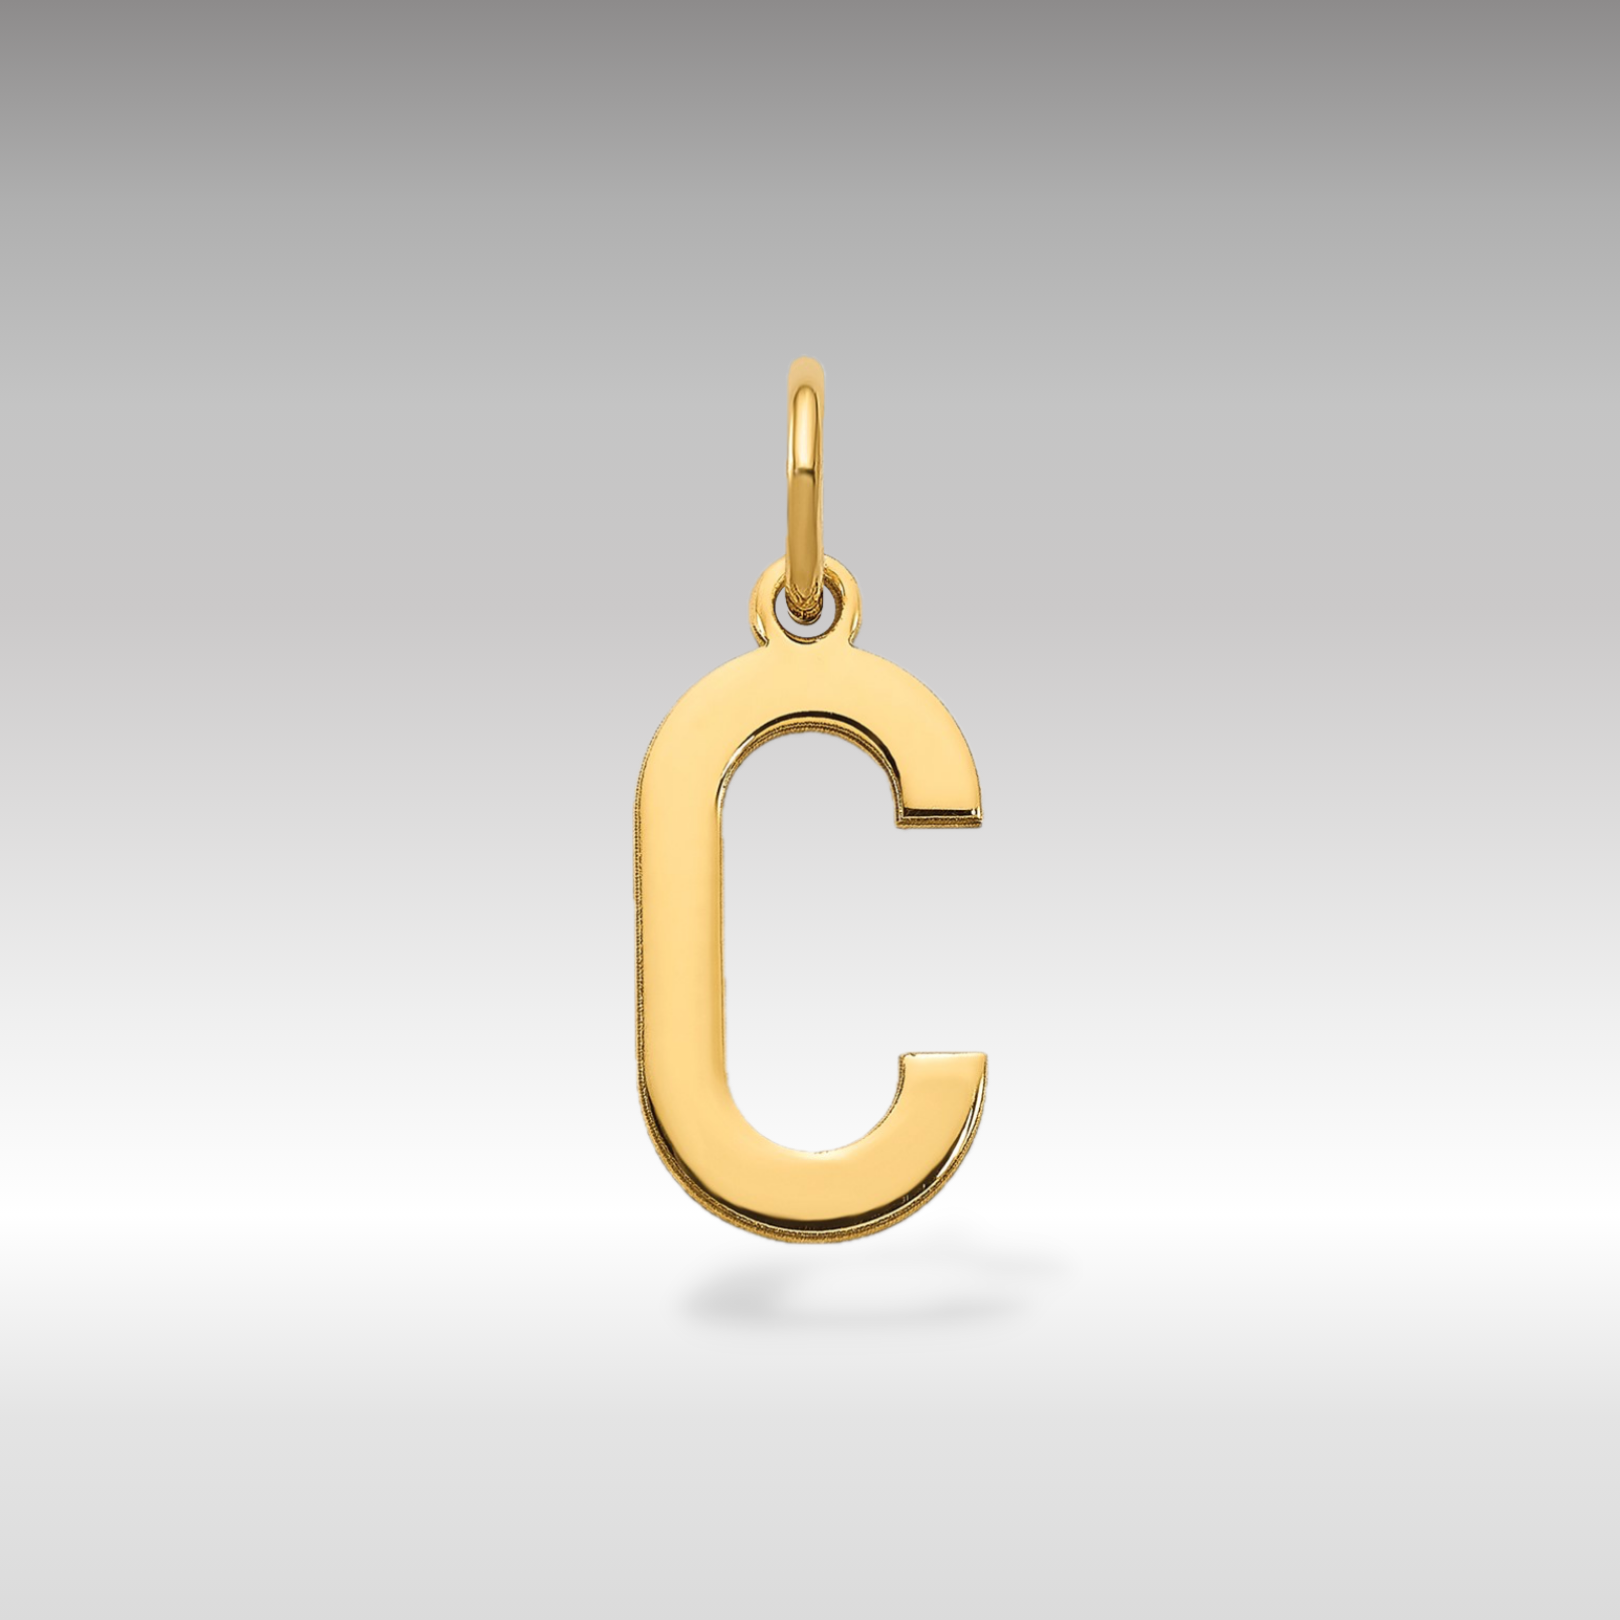 14K Gold Letter "C" Initial Pendant - Charlie & Co. Jewelry